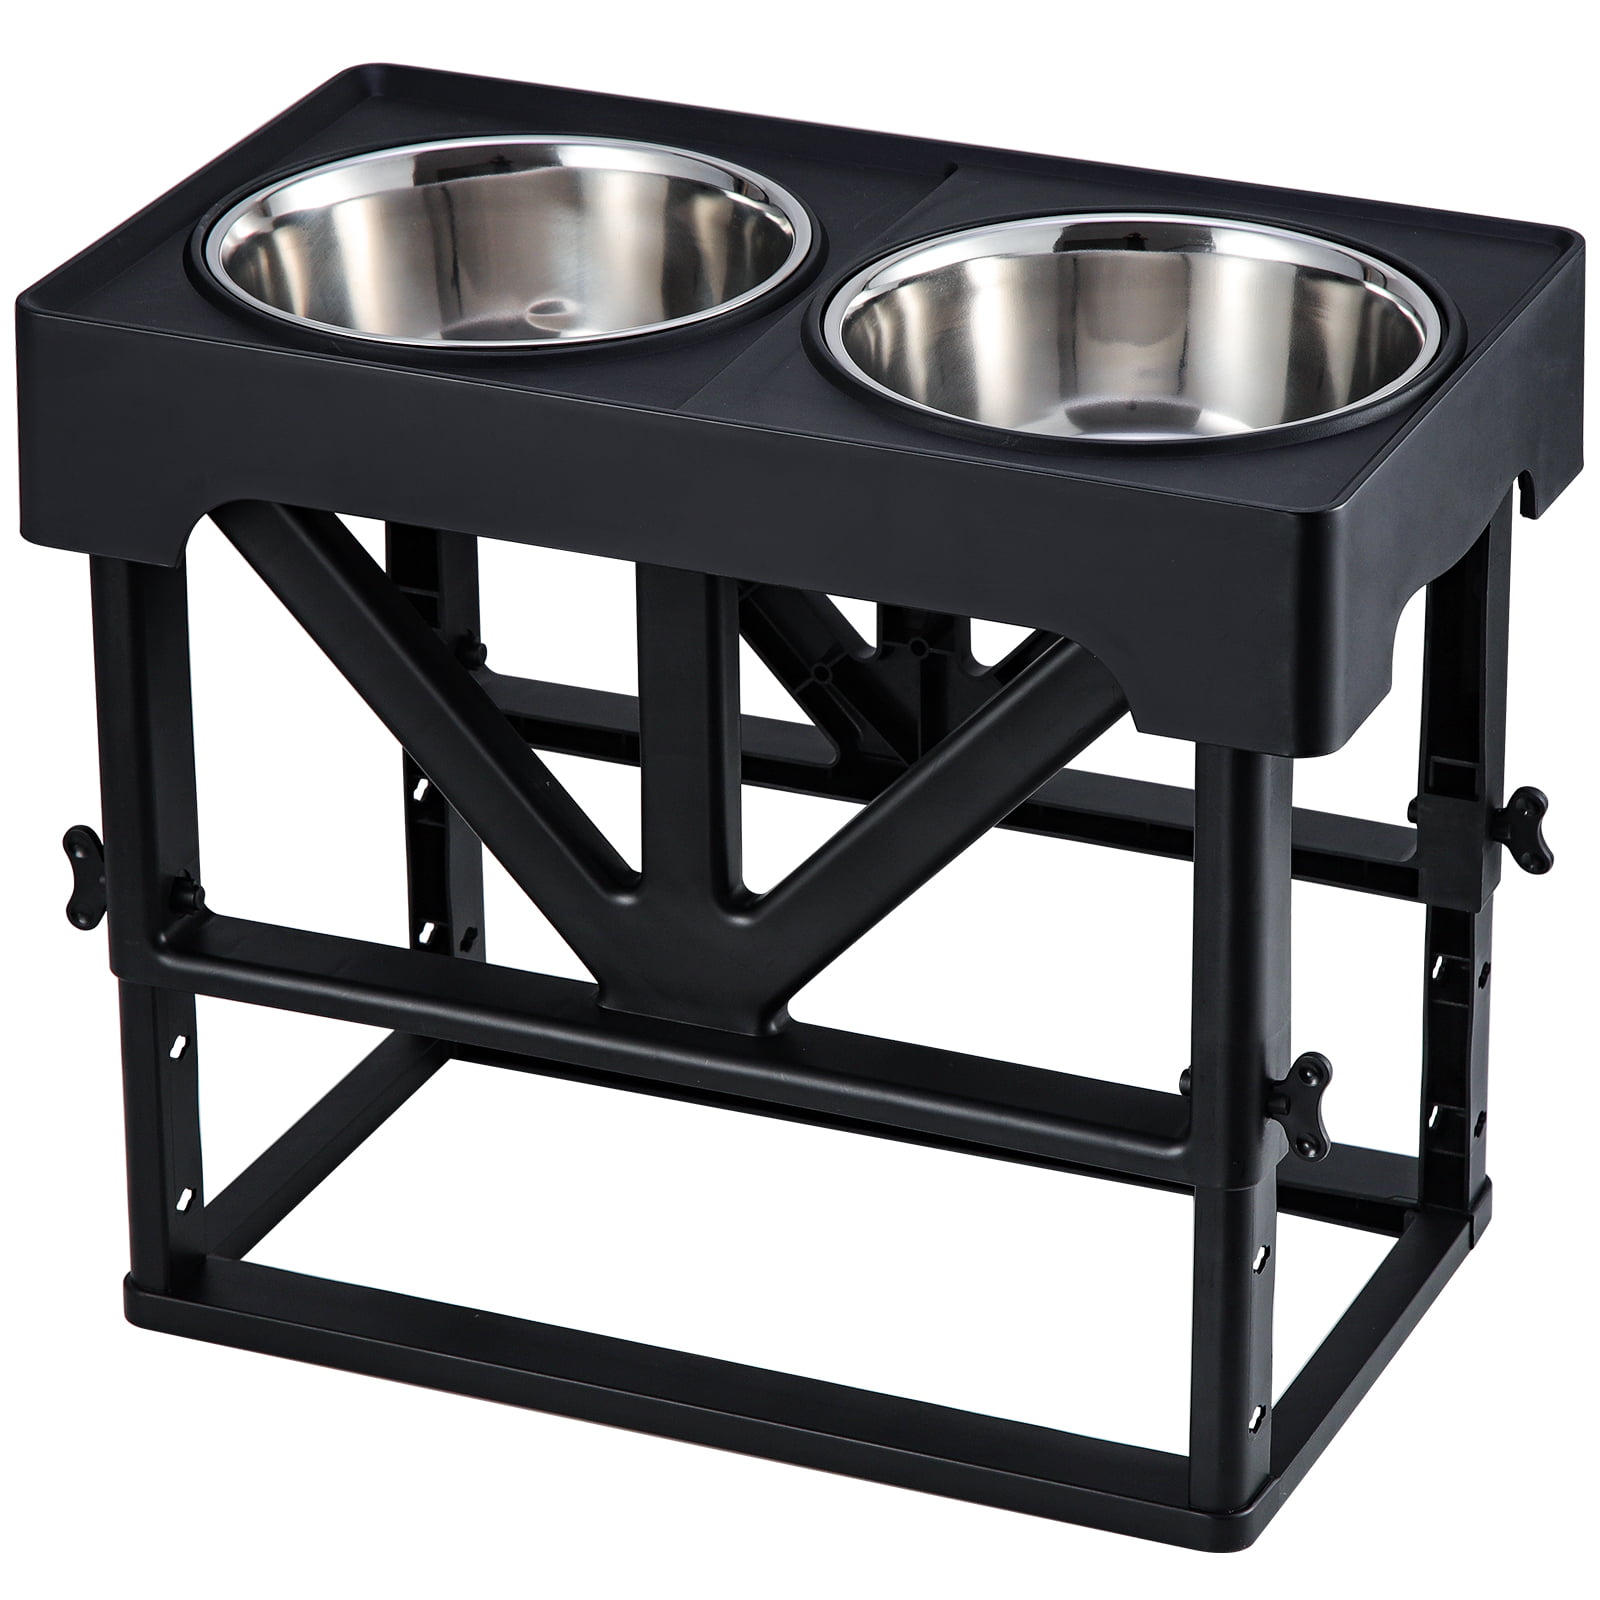 10 Elevated Raised Dog Feeder Stainless Steel Double Bowl Food Water Pet  Dish, 1 Unit - Kroger